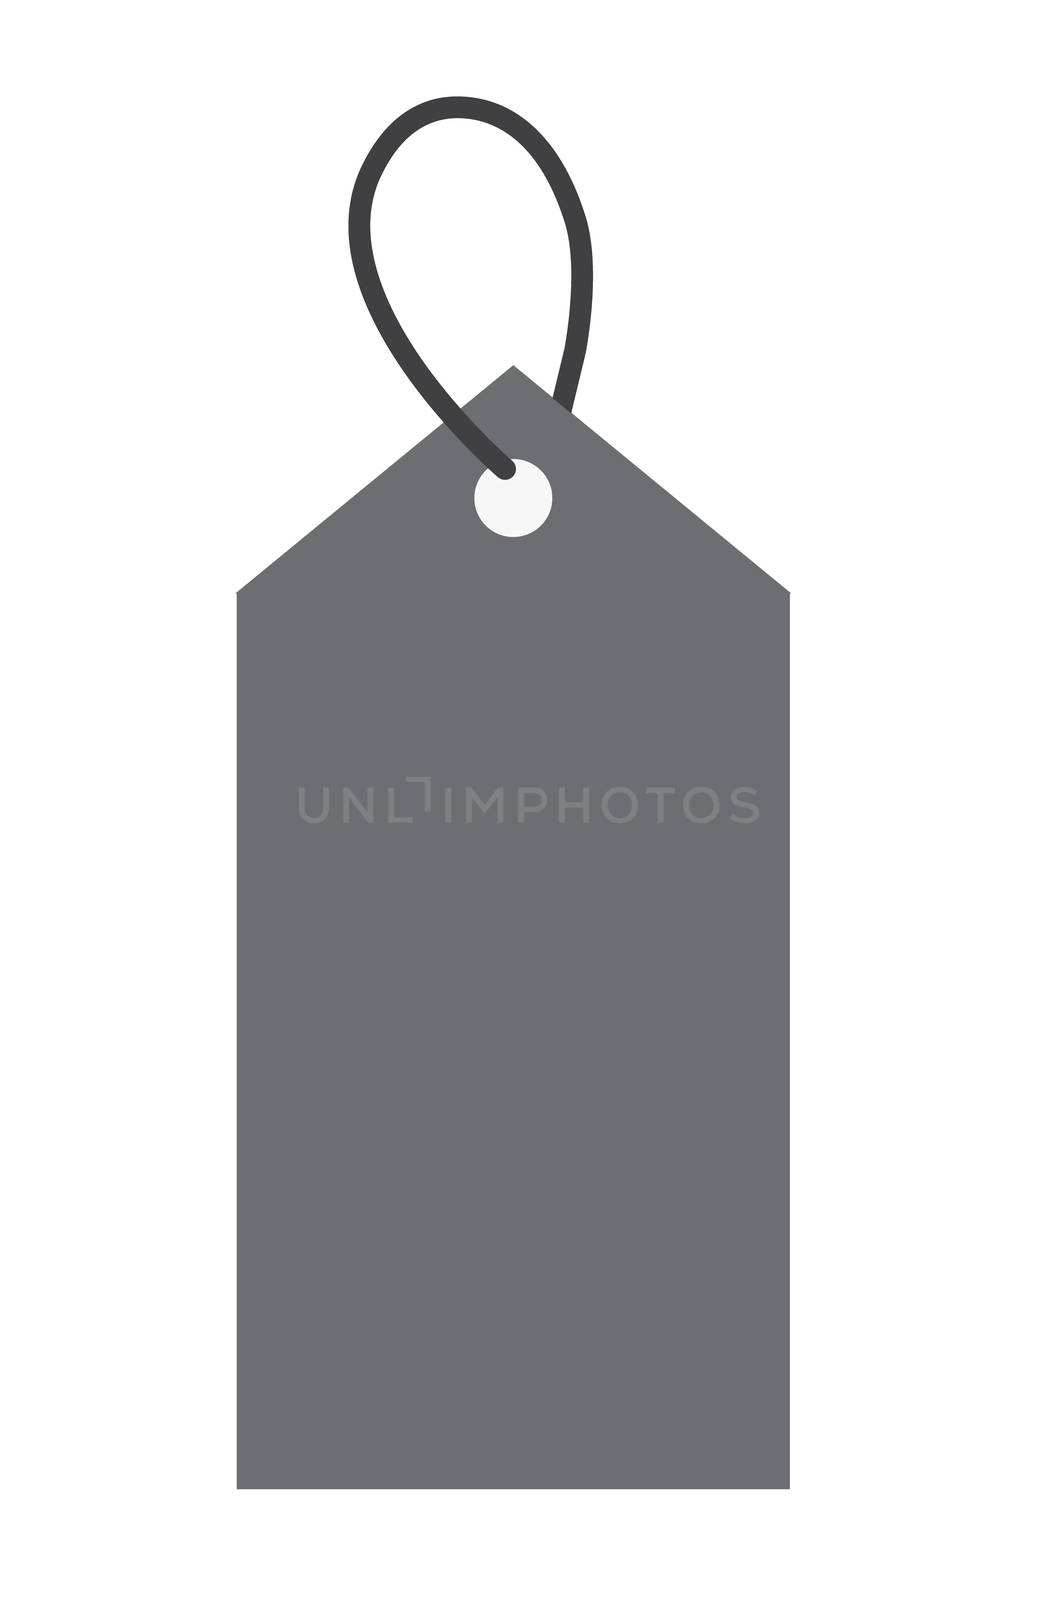 price tag icon on white background. price tag sign. flat style design.